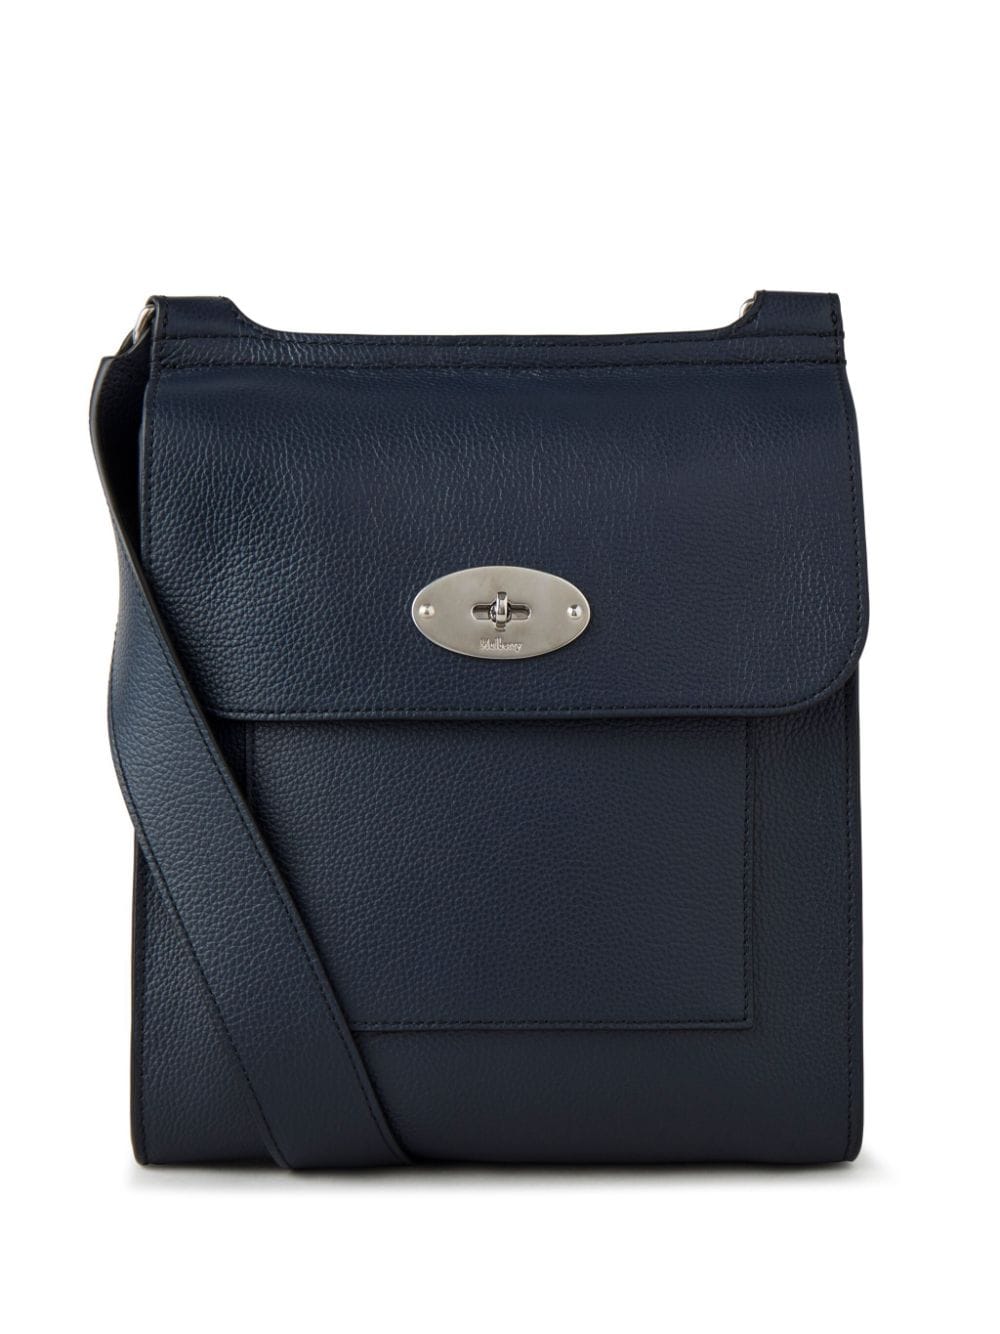 Mulberry Antony Leather Messenger Bag In Blue